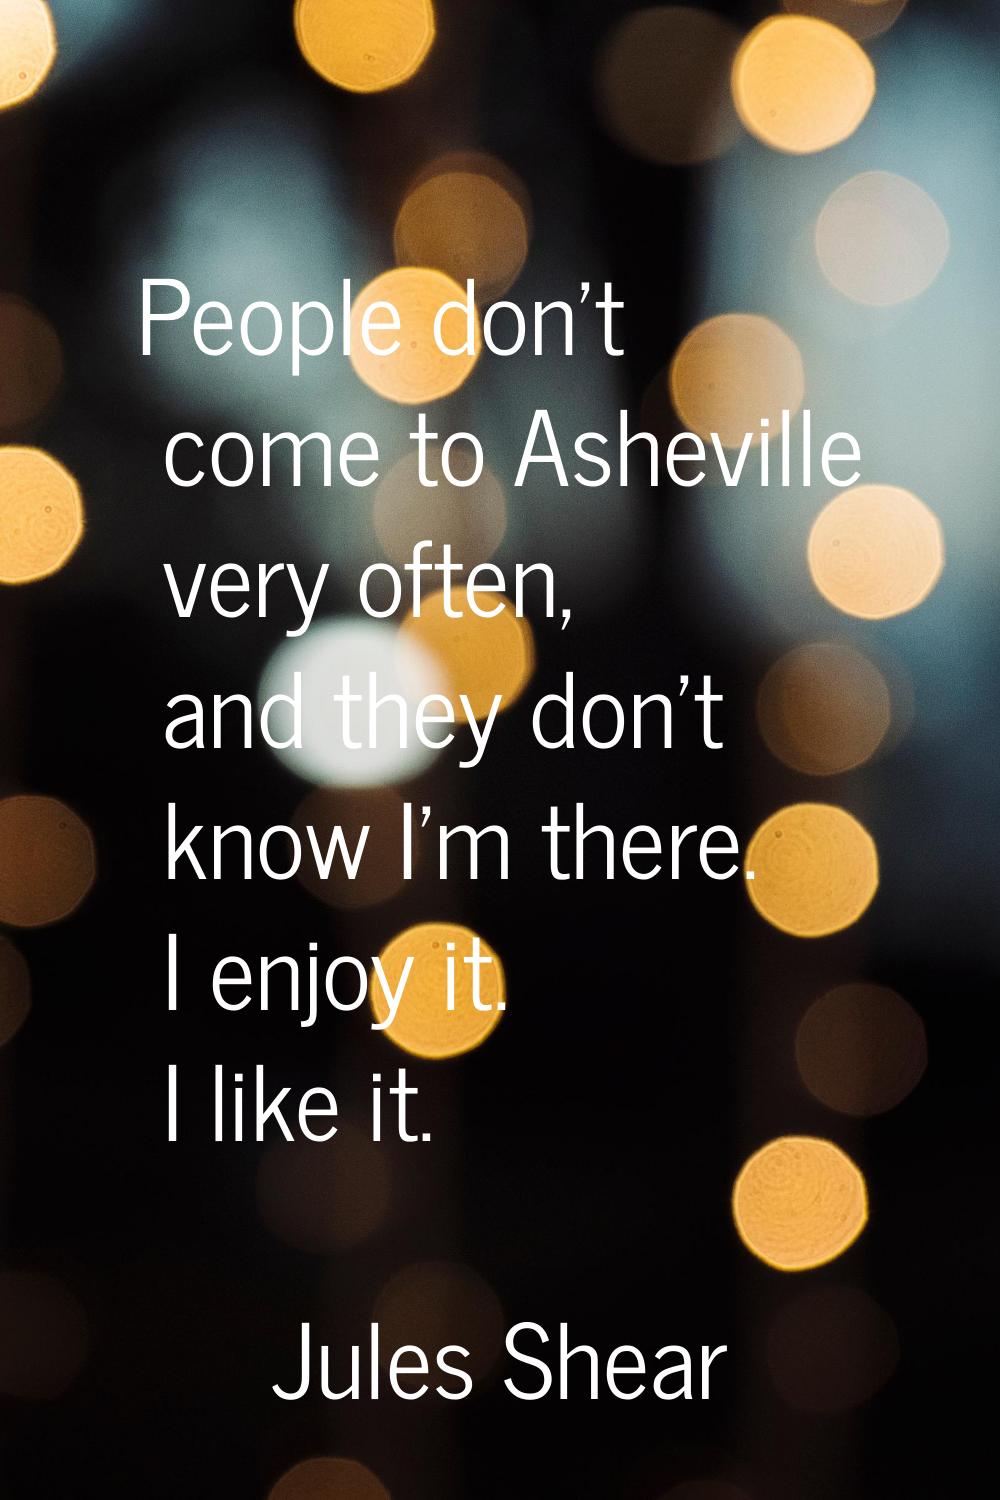 People don't come to Asheville very often, and they don't know I'm there. I enjoy it. I like it.